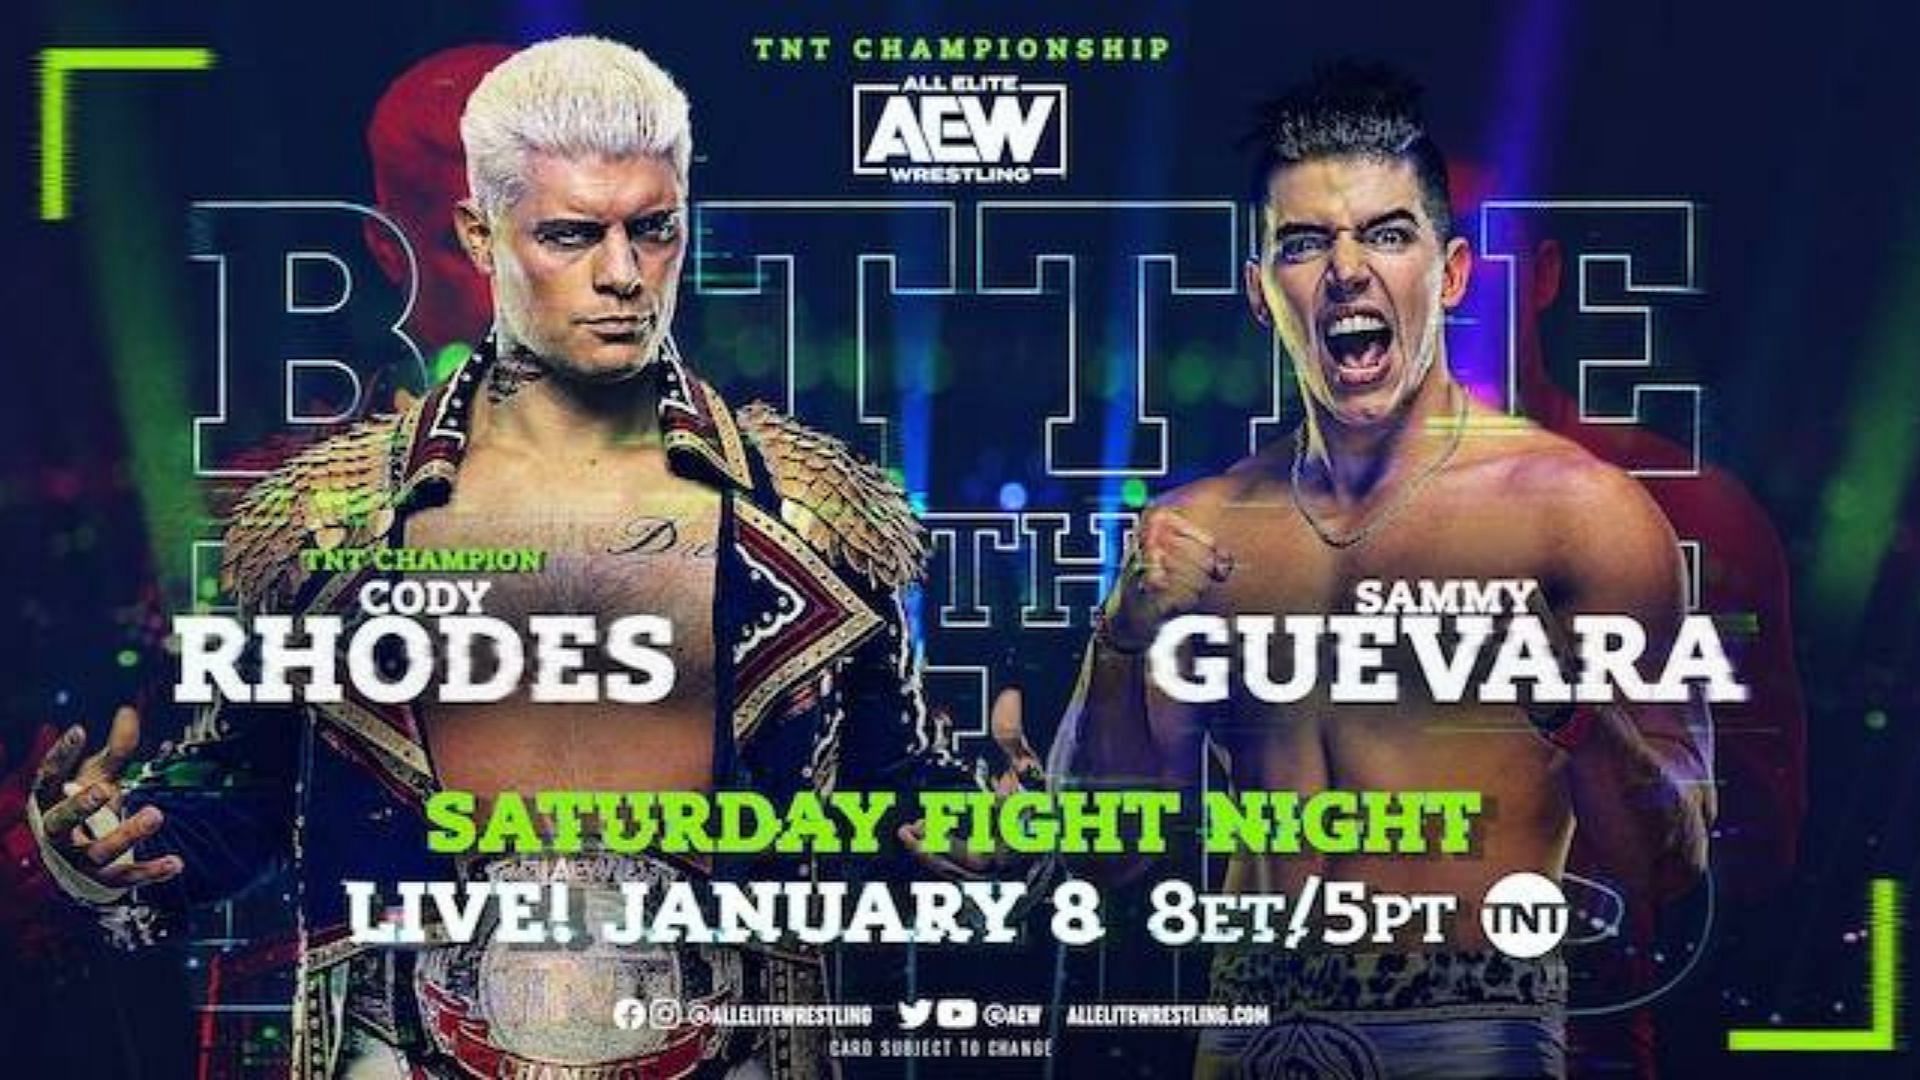 Cody Rhodes is scheduled to face Sammy Guevara at Battle of the Belts